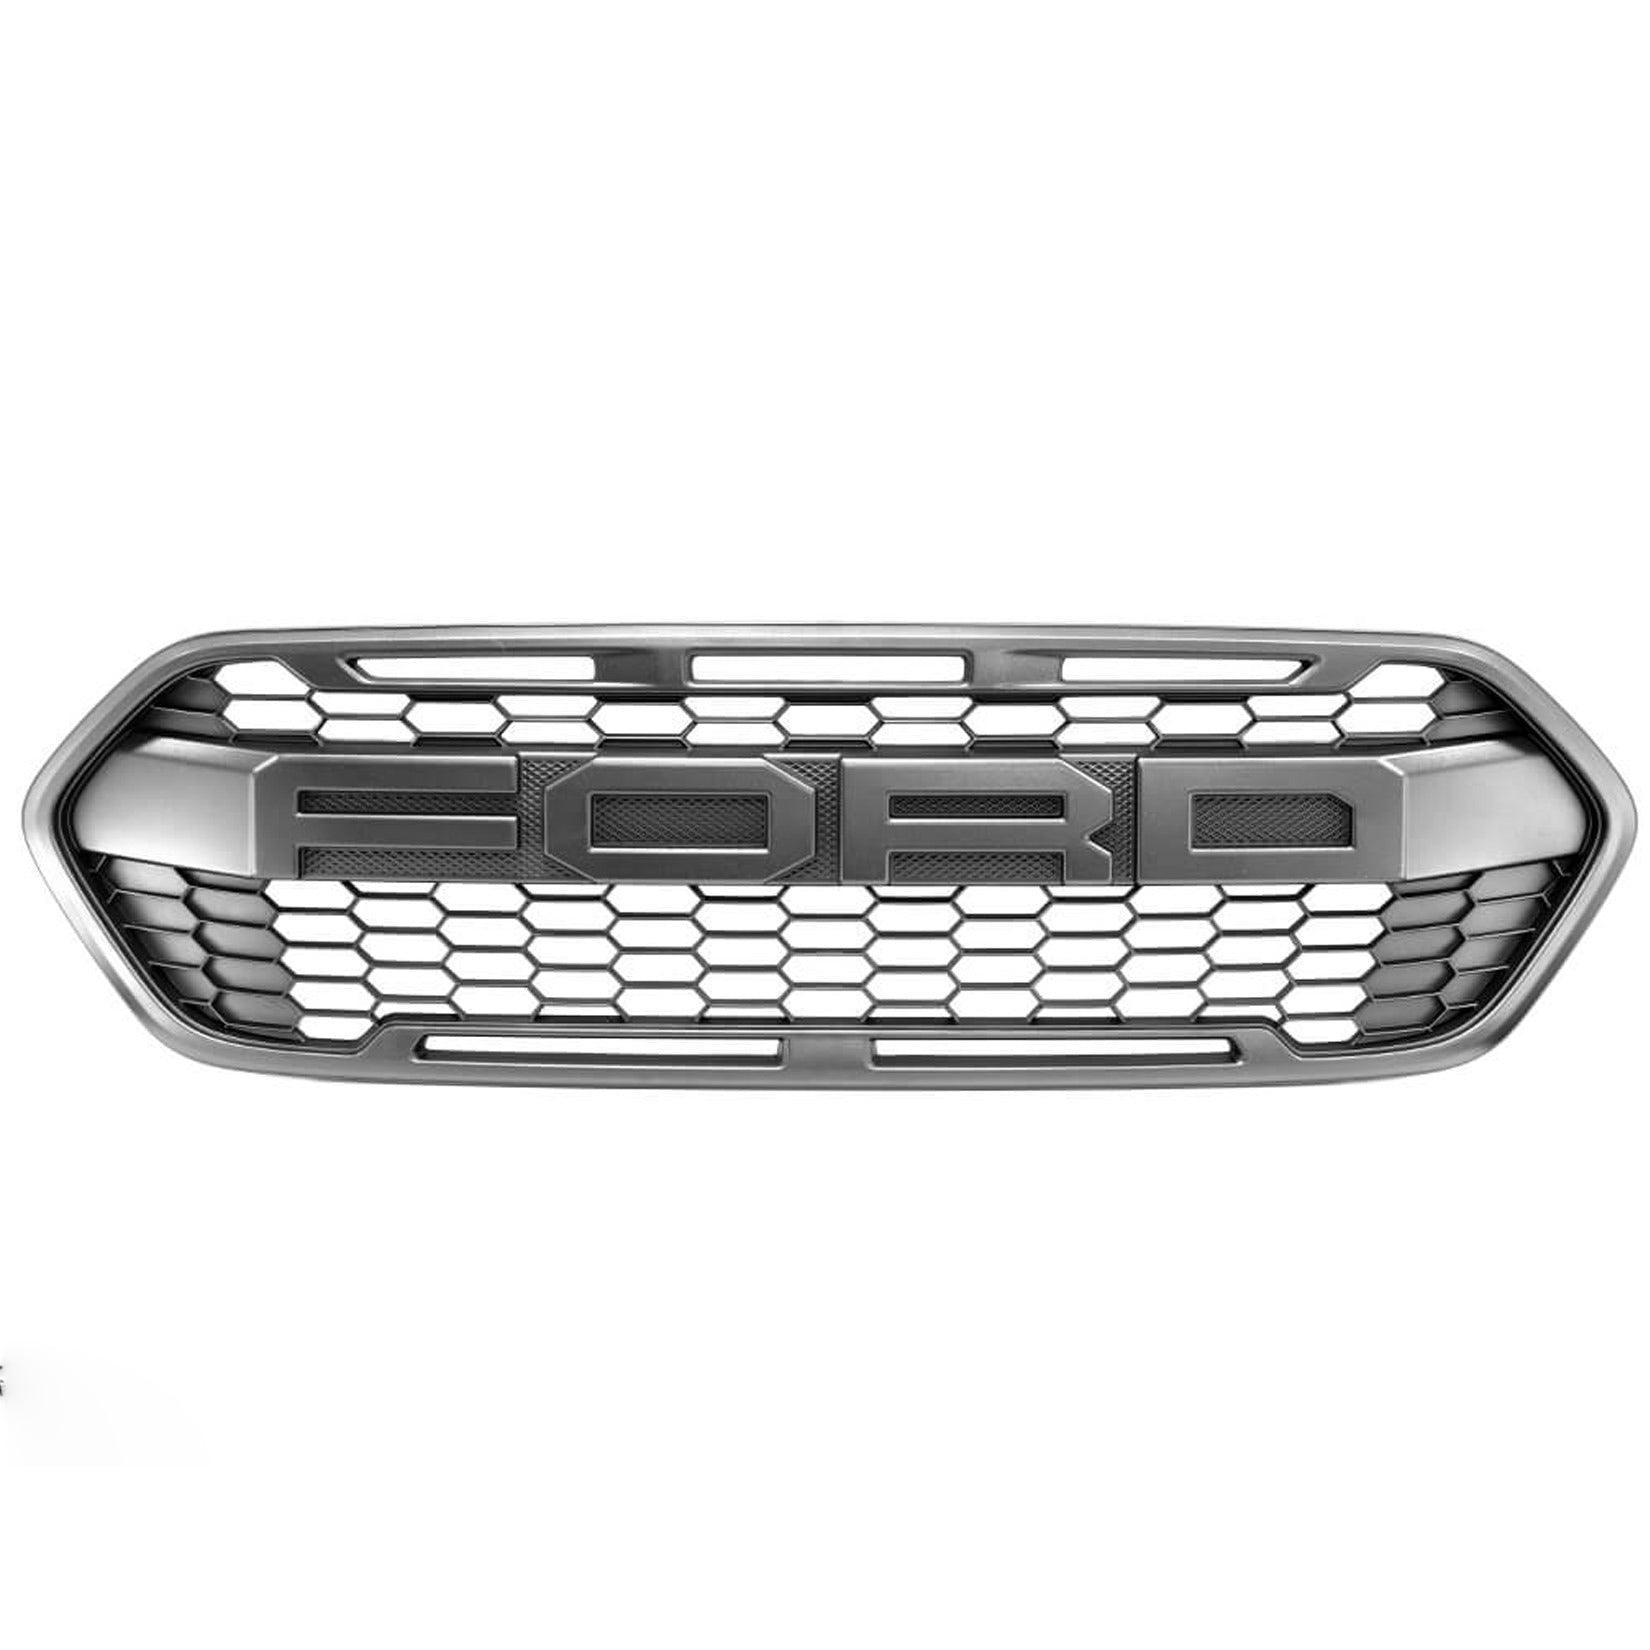 FORD TRANSIT CUSTOM 2018 ON - GENUINE FRONT RAPTOR STYLE GRILLE - Storm Xccessories2